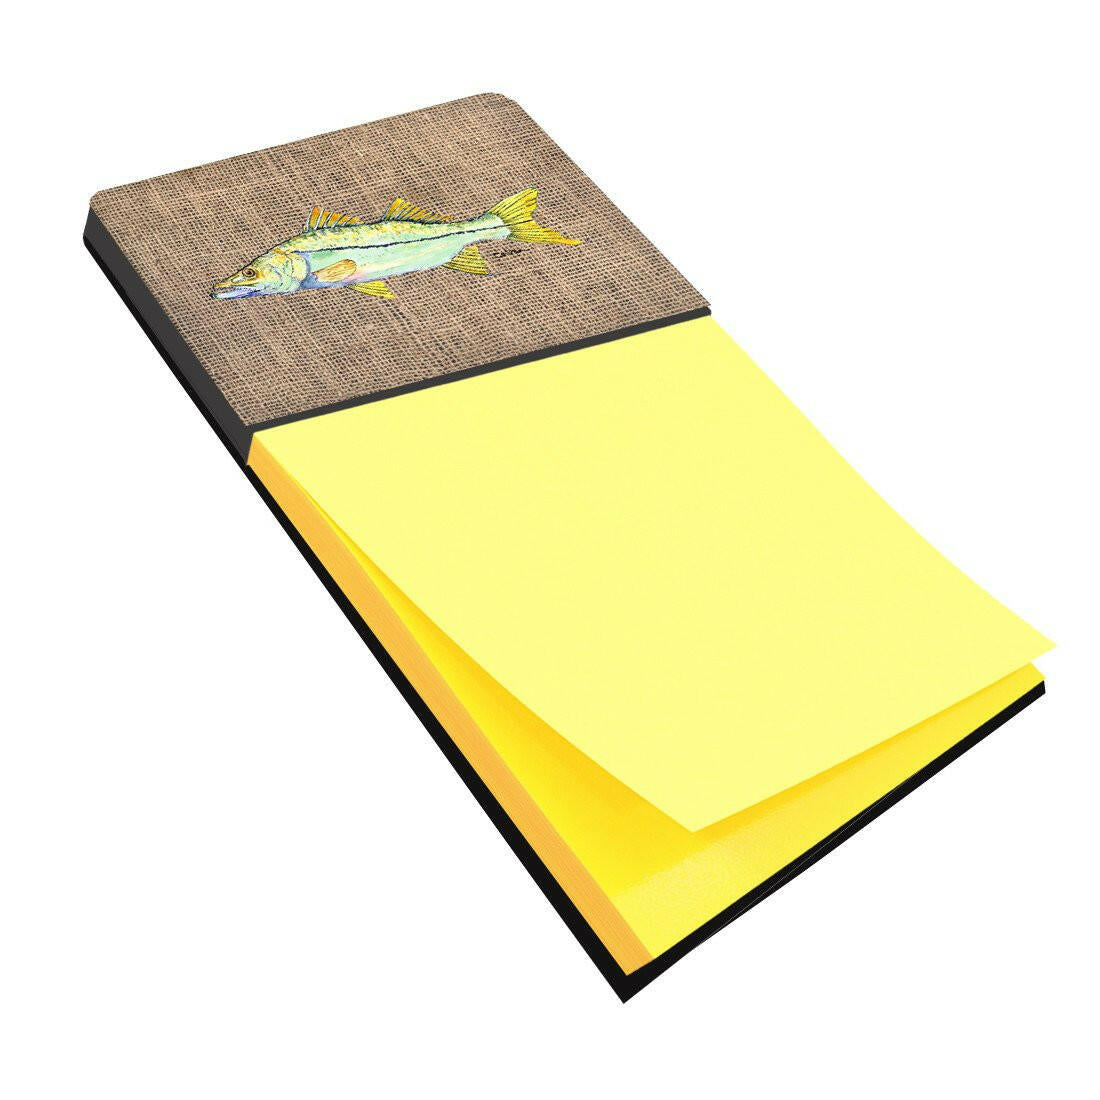 Fish - Snook Refiillable Sticky Note Holder or Postit Note Dispenser 8772SN by Caroline&#39;s Treasures